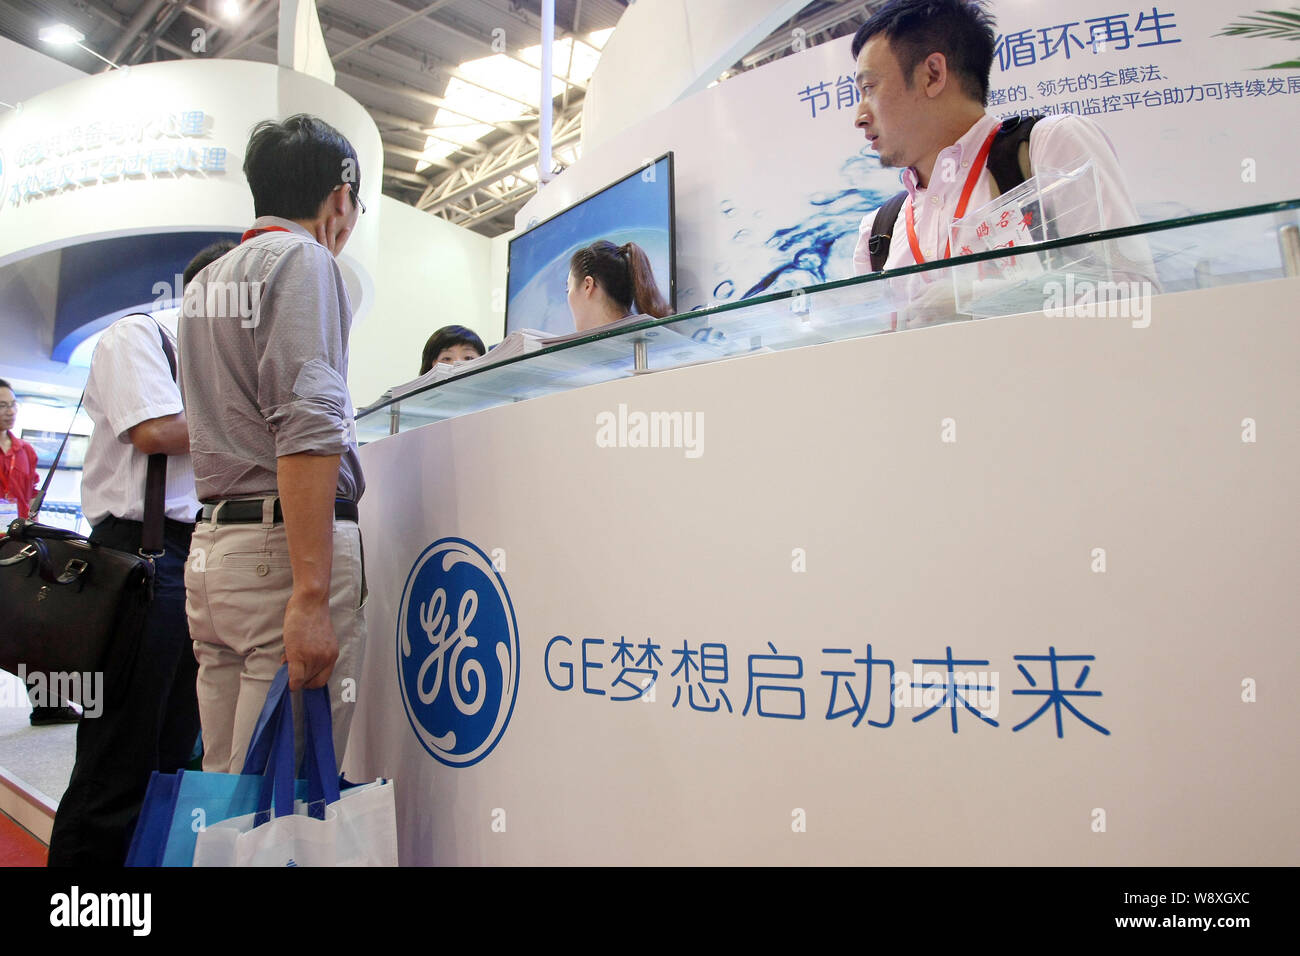 --FILE--People visit the stand of GE (General Electric) during an exhibition in Shanghai, China, 5 June 2013.   General Electric Co.'s China head expe Stock Photo